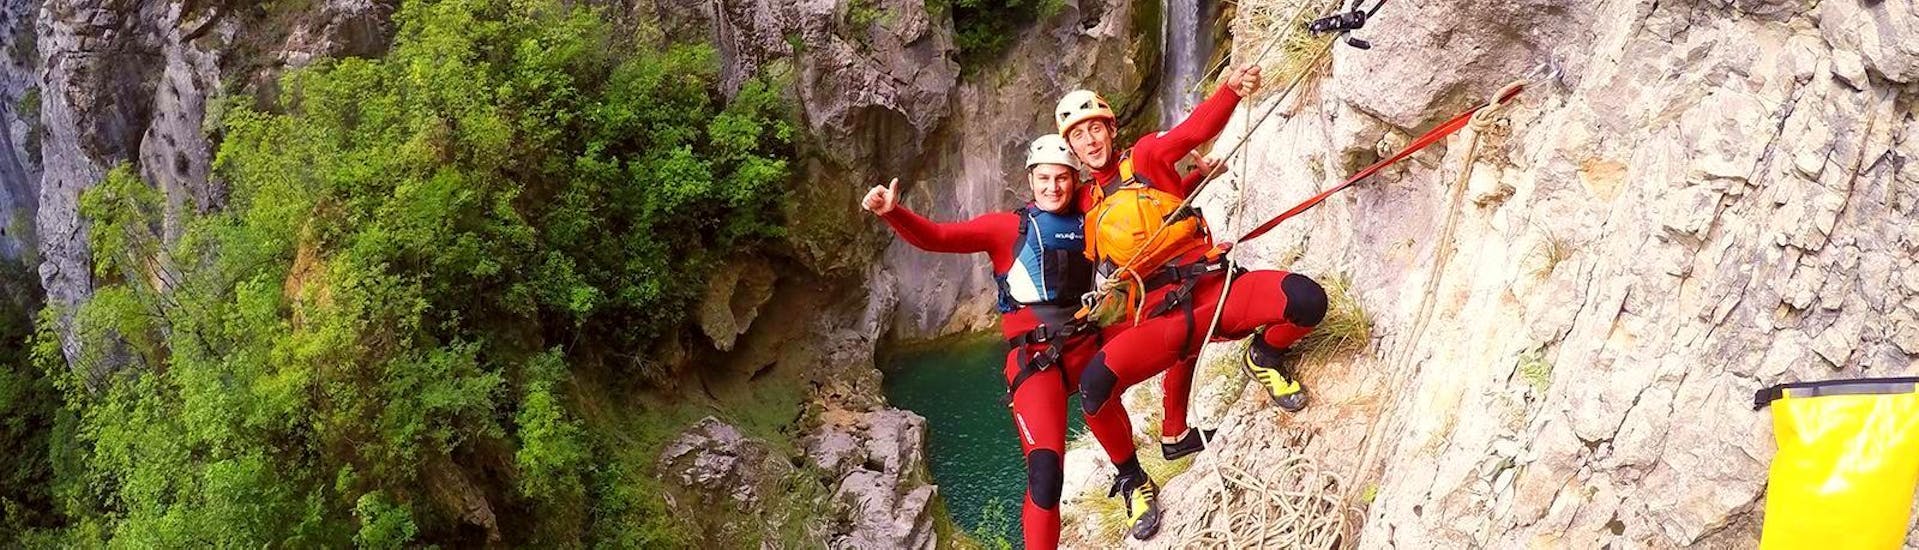 Advanced Canyoning in the Cetina River near Omiš with Adventure Omiš - Hero image